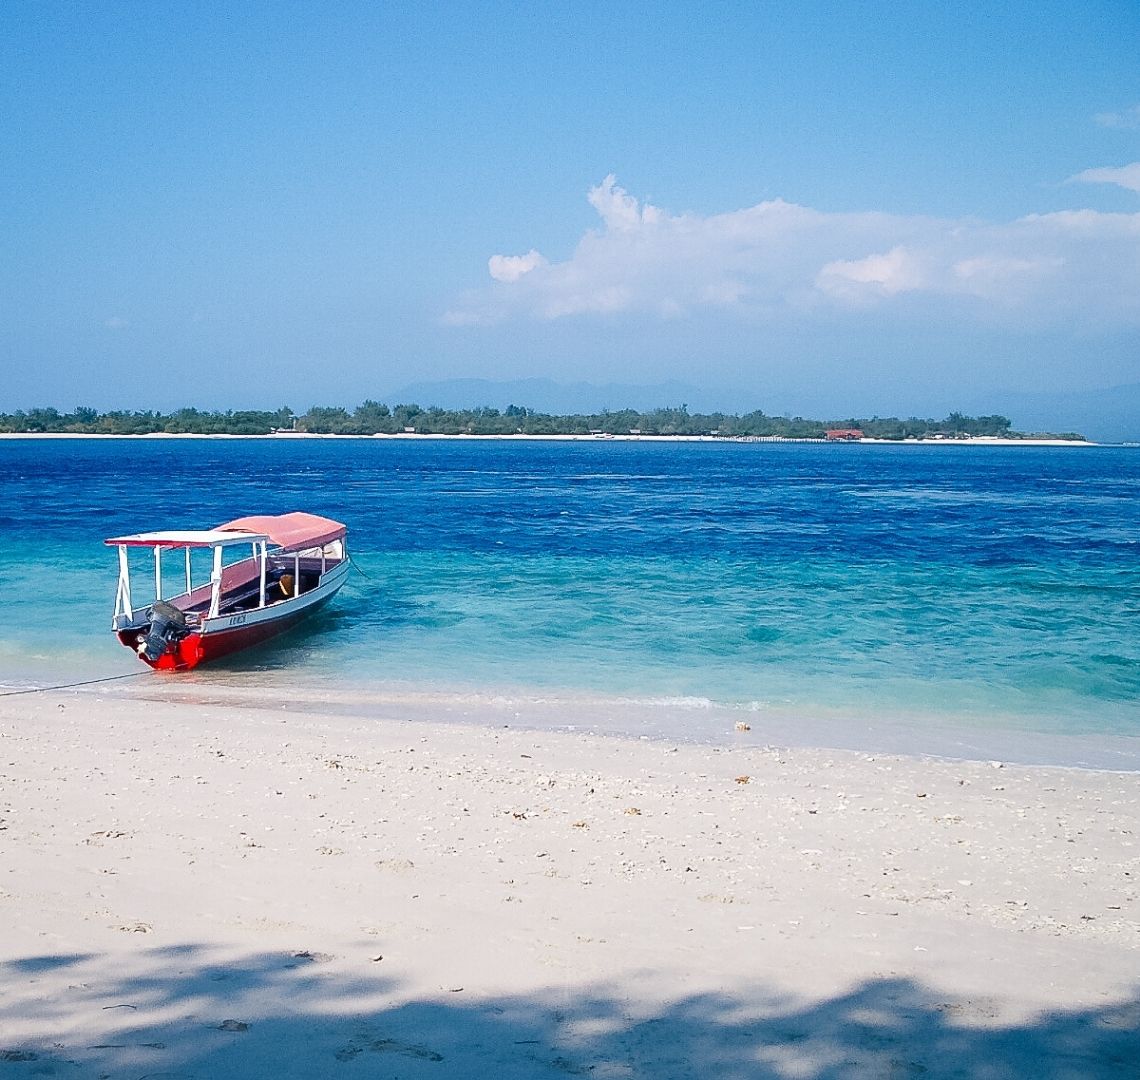 White white sand leads to turquoise water which then turns a deeper but bright blue. In the distance is another island with a thin white strip of sand and some trees and a building. In the shallows on this side, just pulled up to the beach is a red bottomed boat with white sides and a faded red roof. 